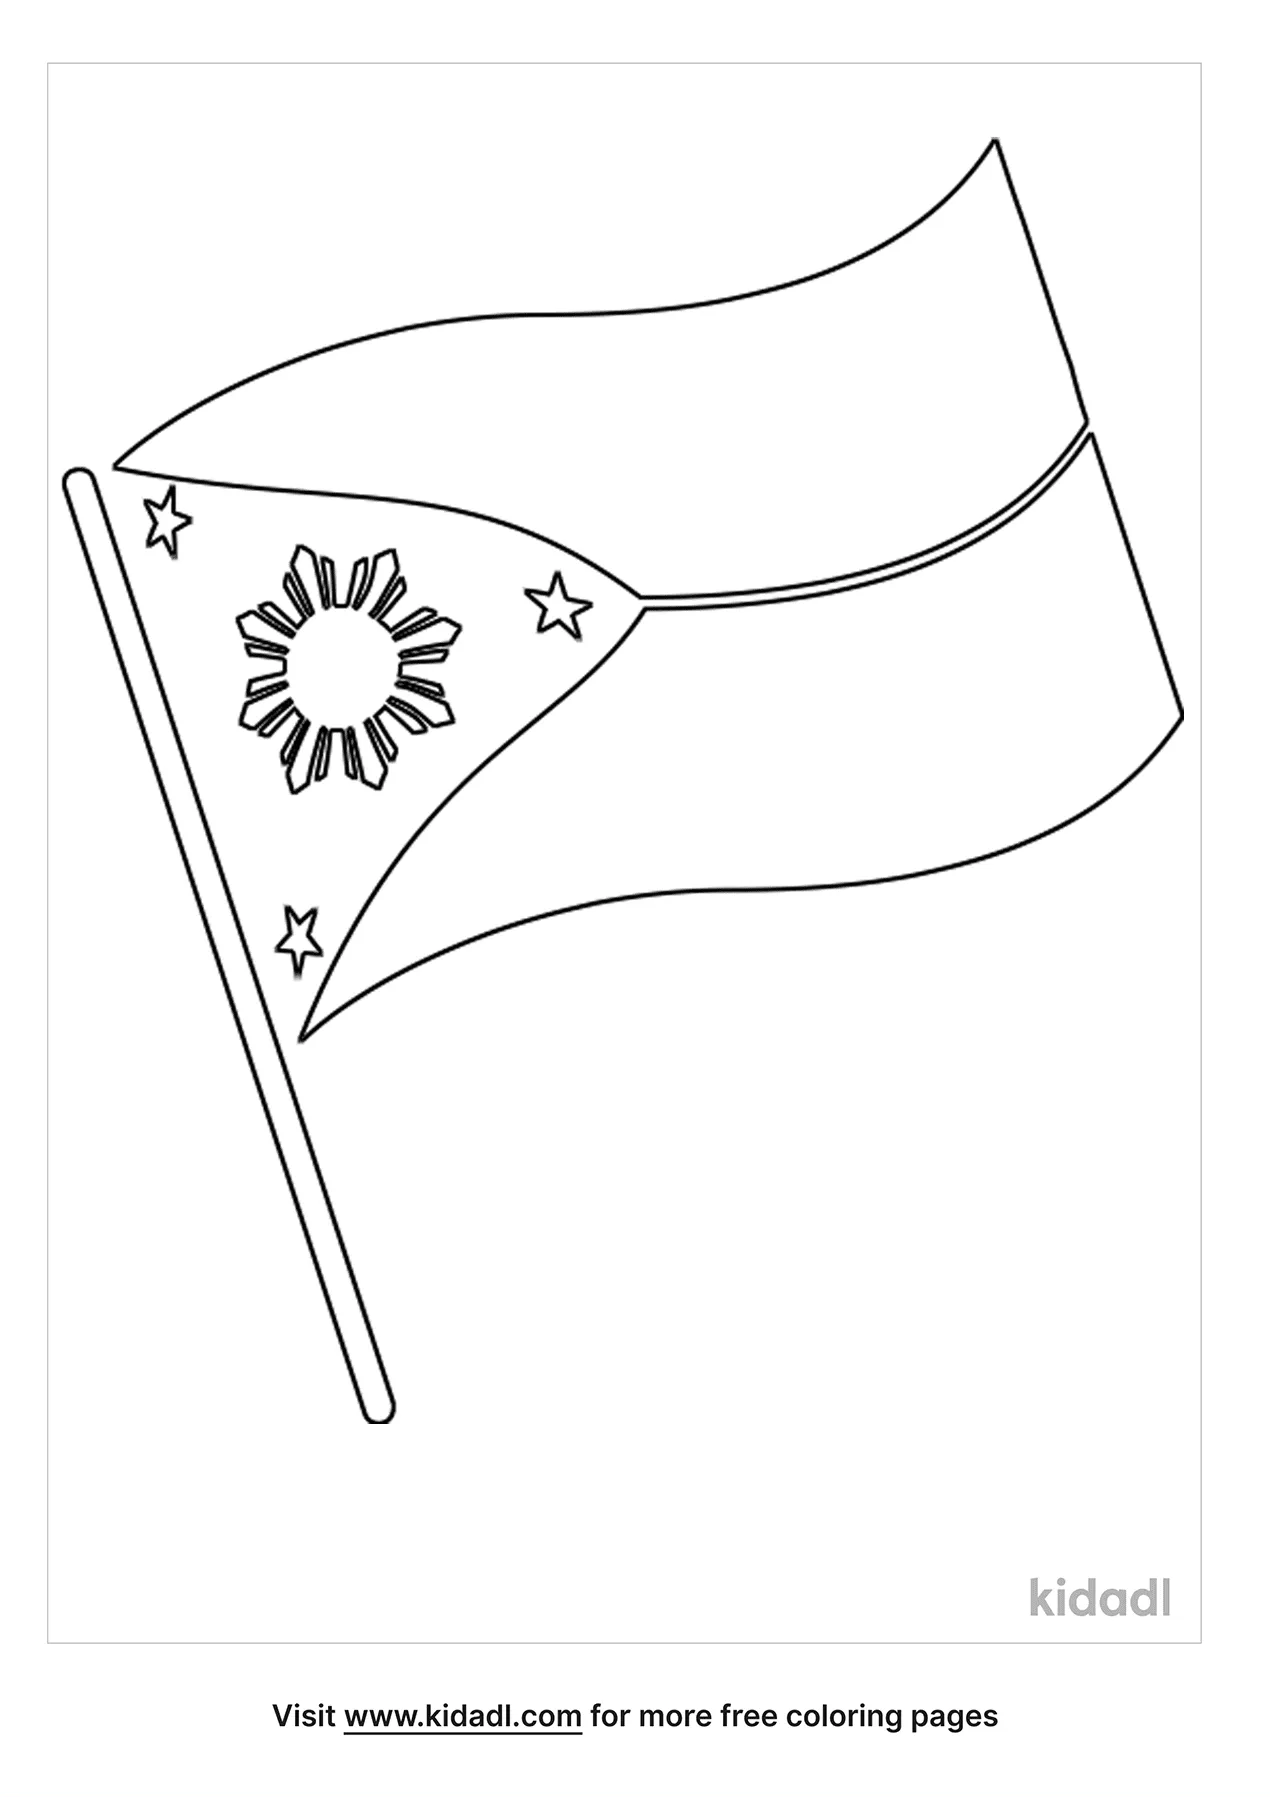 Philippine Flag Coloring Page 112 Practice Coloring Role